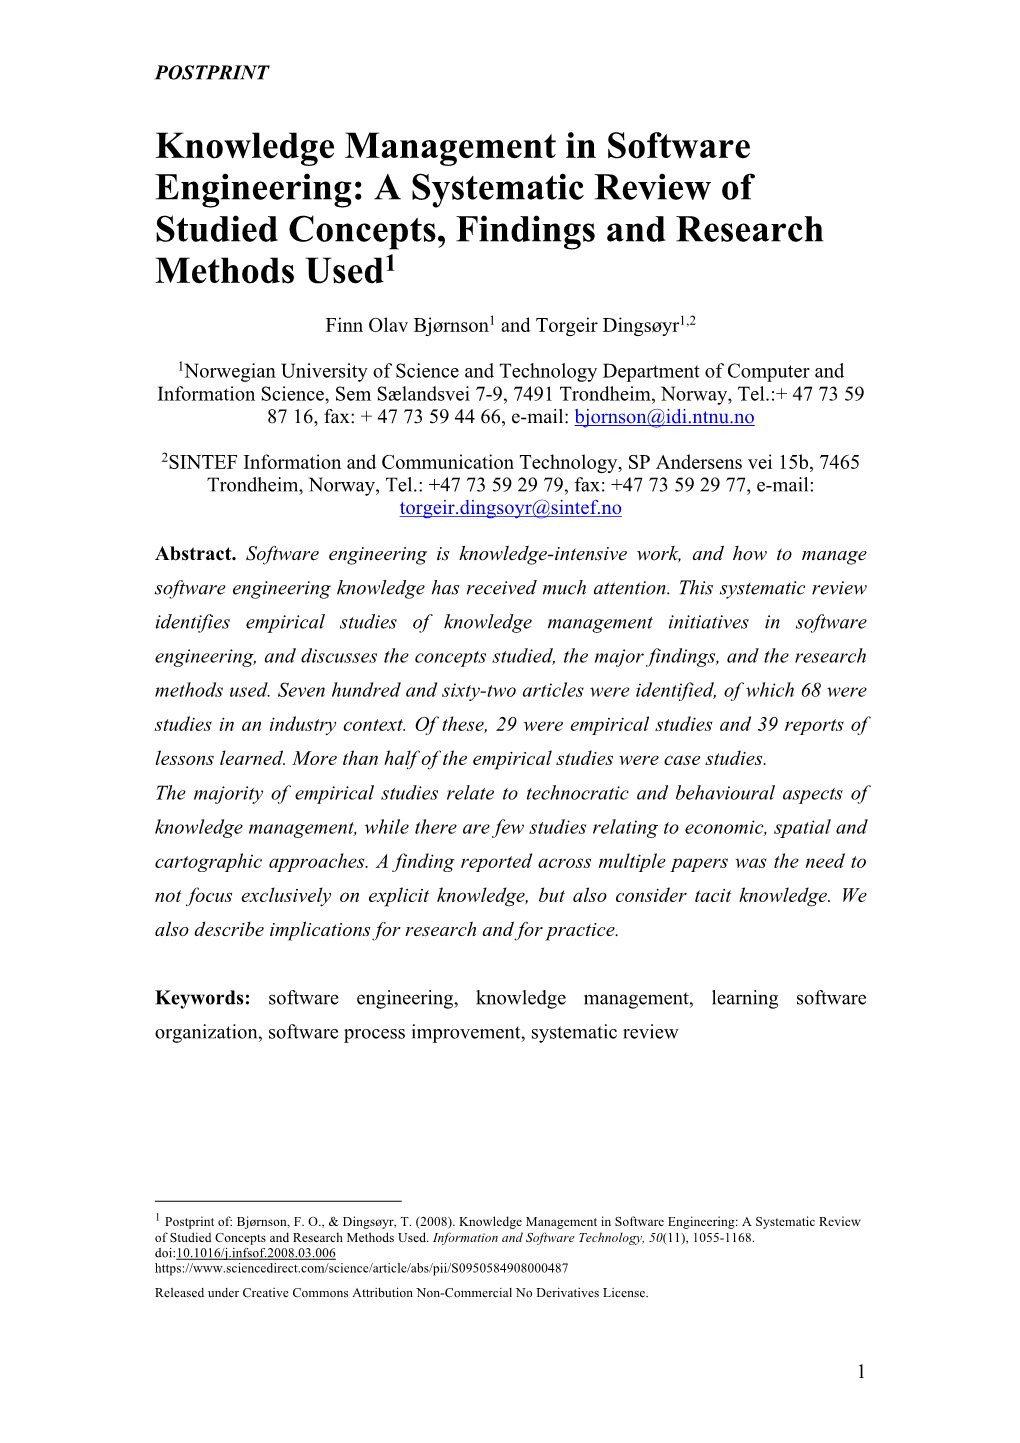 Knowledge Management in Software Engineering: a Systematic Review of Studied Concepts, Findings and Research Methods Used1